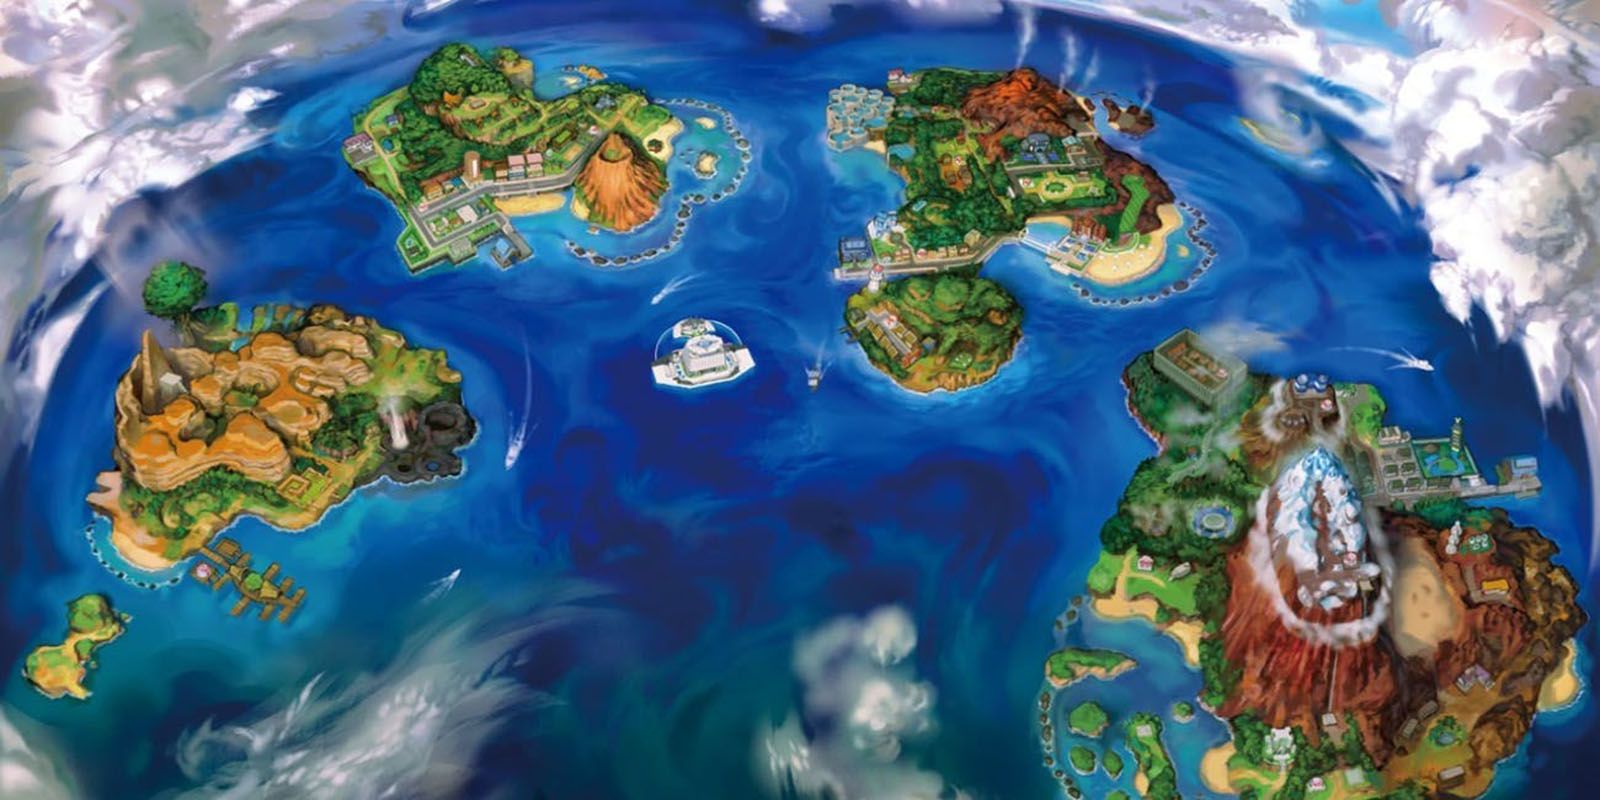 Pokemon All Regions Real Life Counterparts and Generation 9 Region Speculation